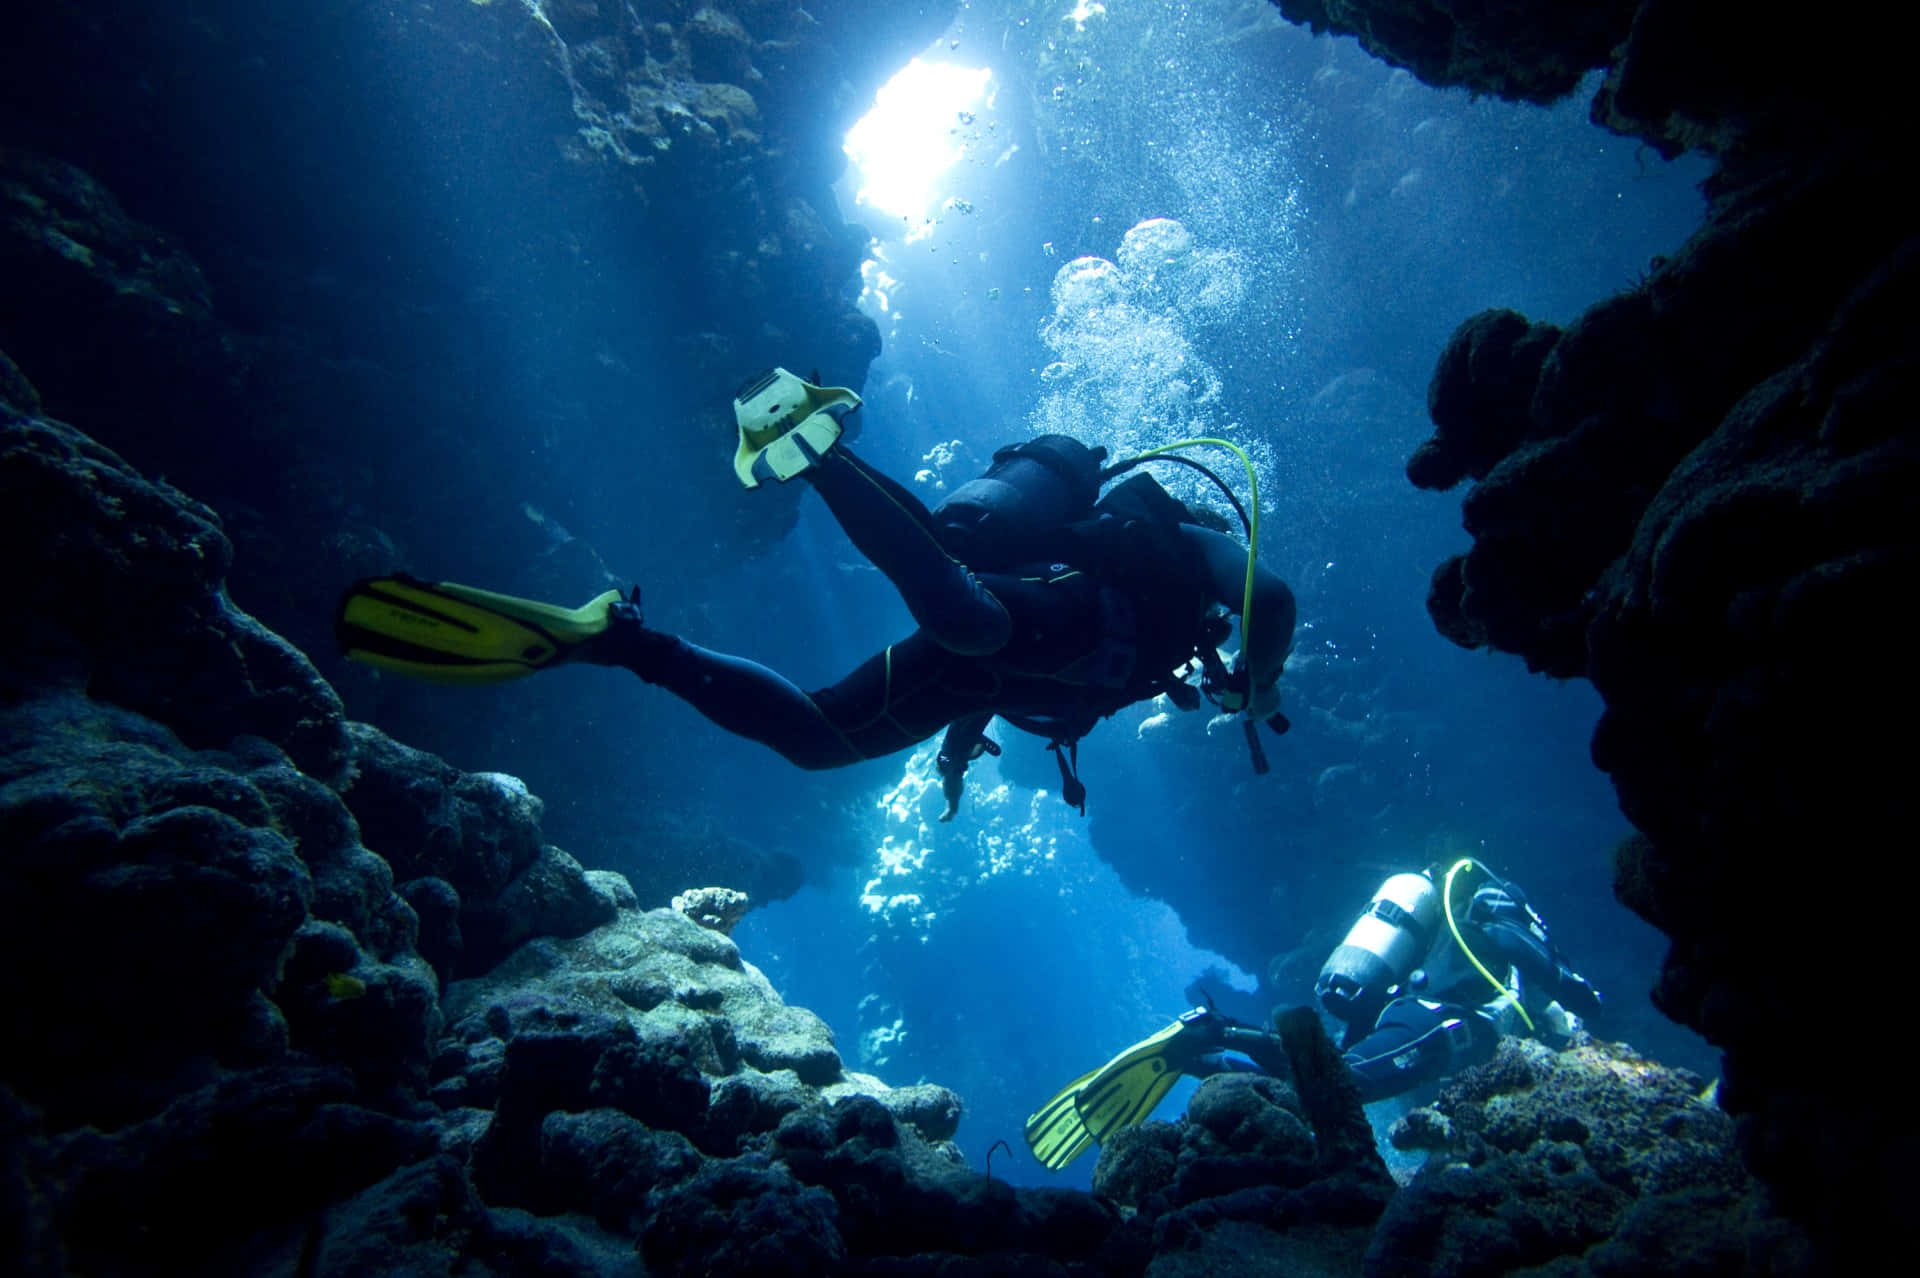 Free Diving in the Gnarliest of Places"